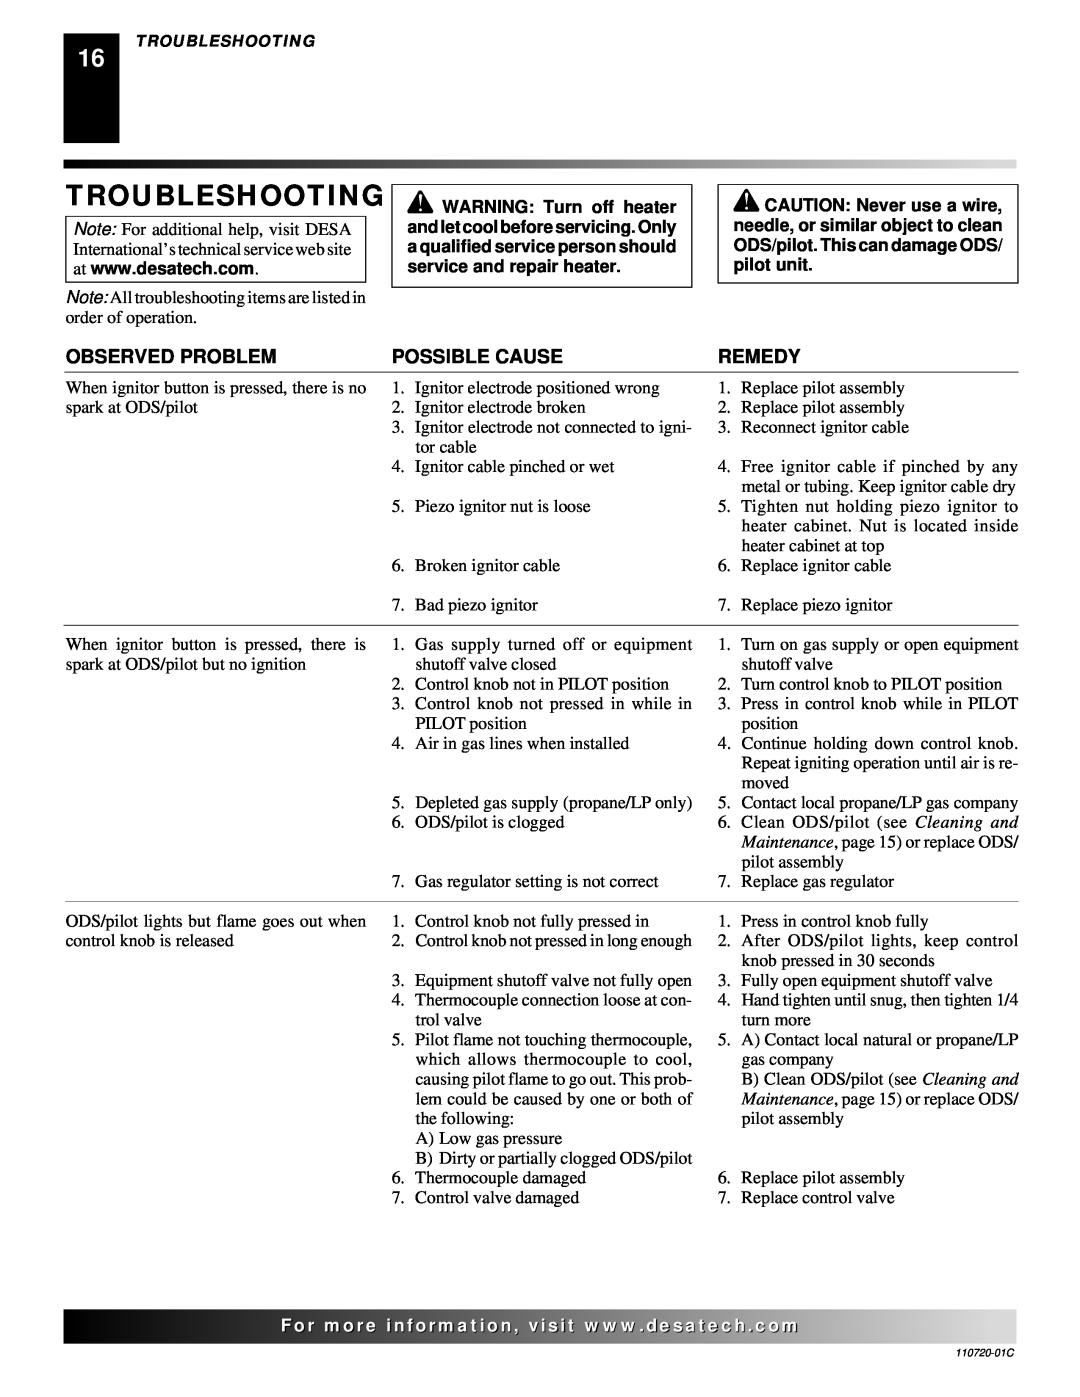 Desa VN10A installation manual Troubleshooting, Observed Problem, Possible Cause, Remedy 